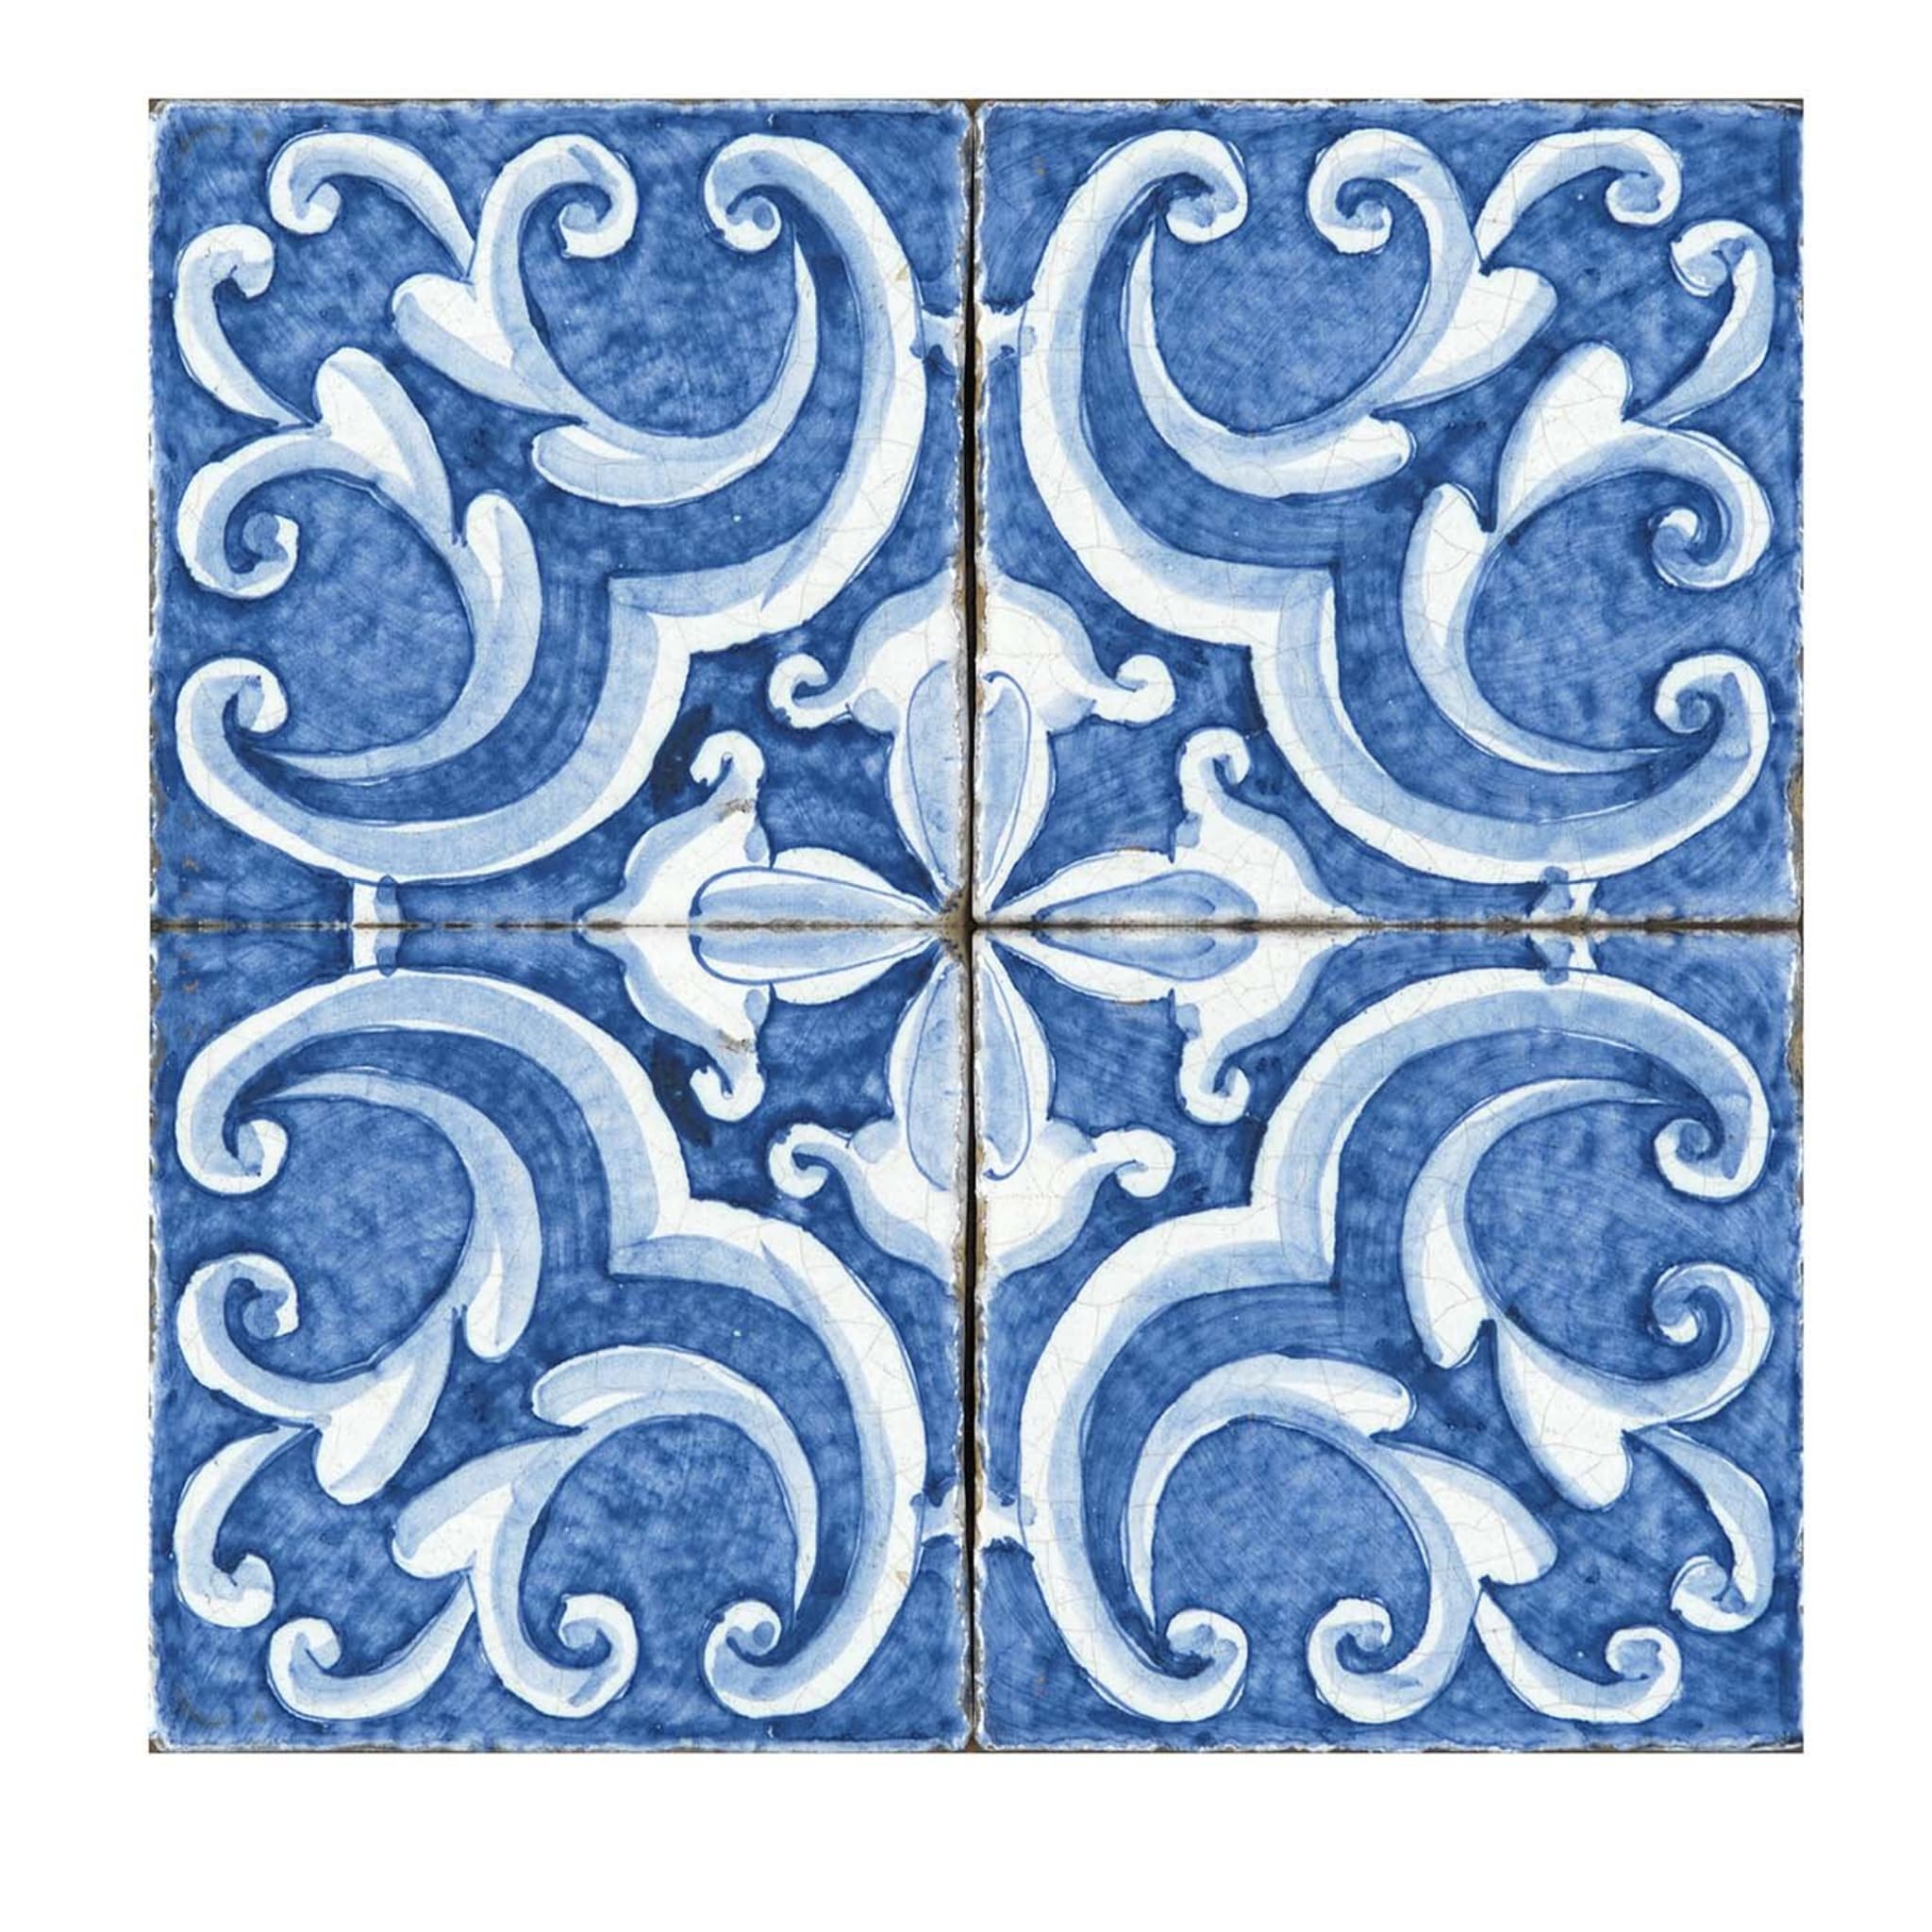 Blu Mare Set of 4 Tiles #5 - Main view